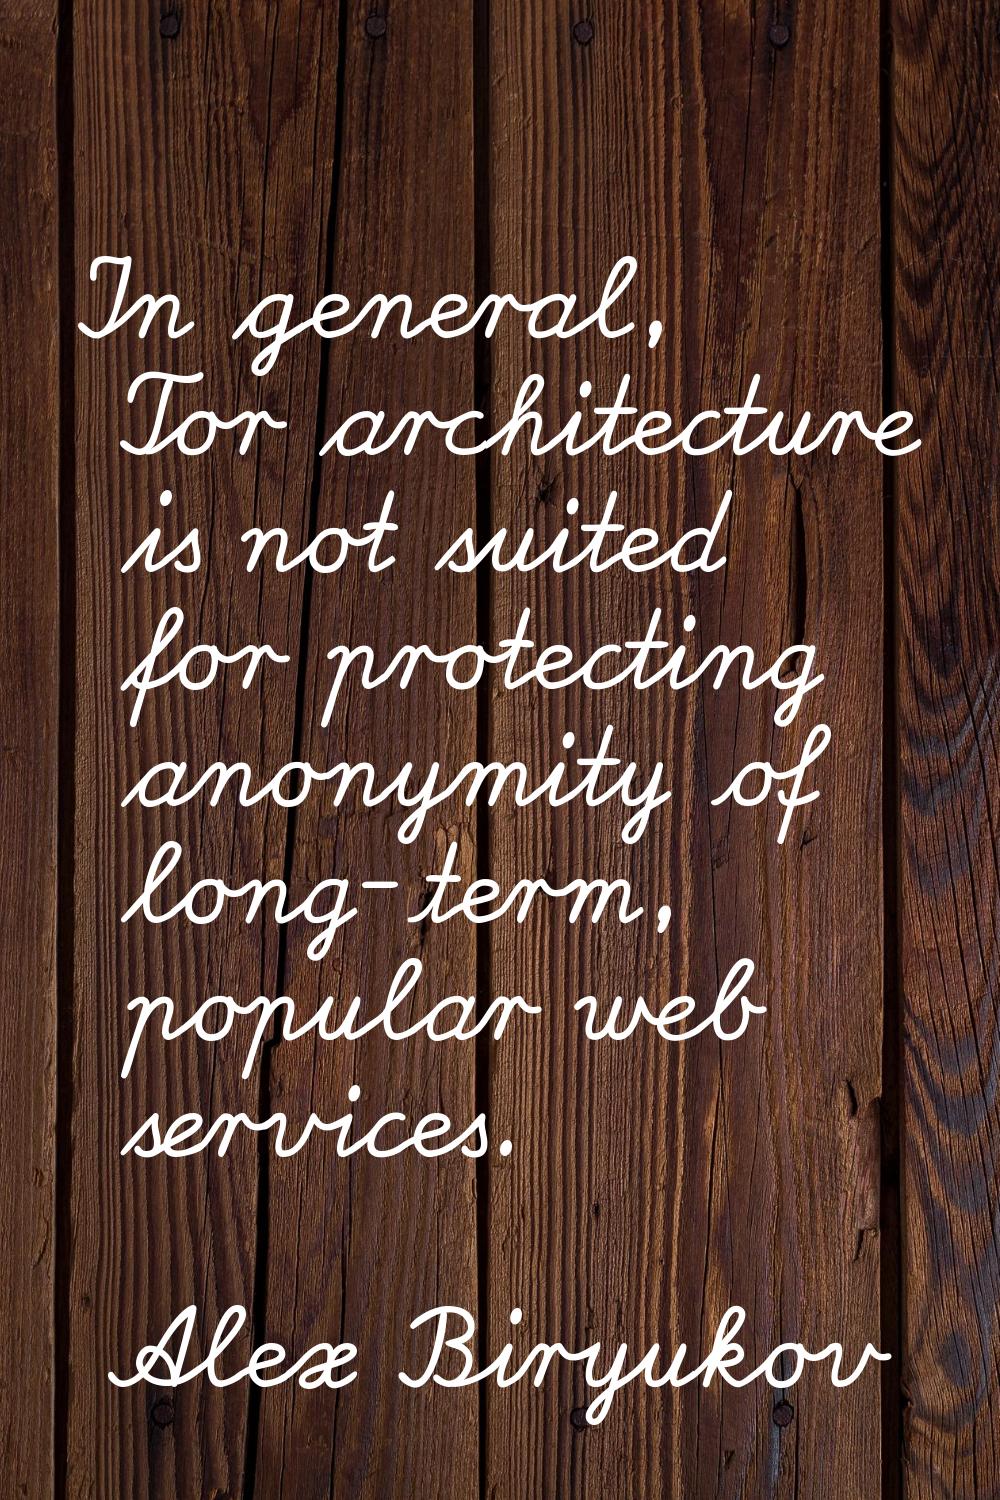 In general, Tor architecture is not suited for protecting anonymity of long-term, popular web servi